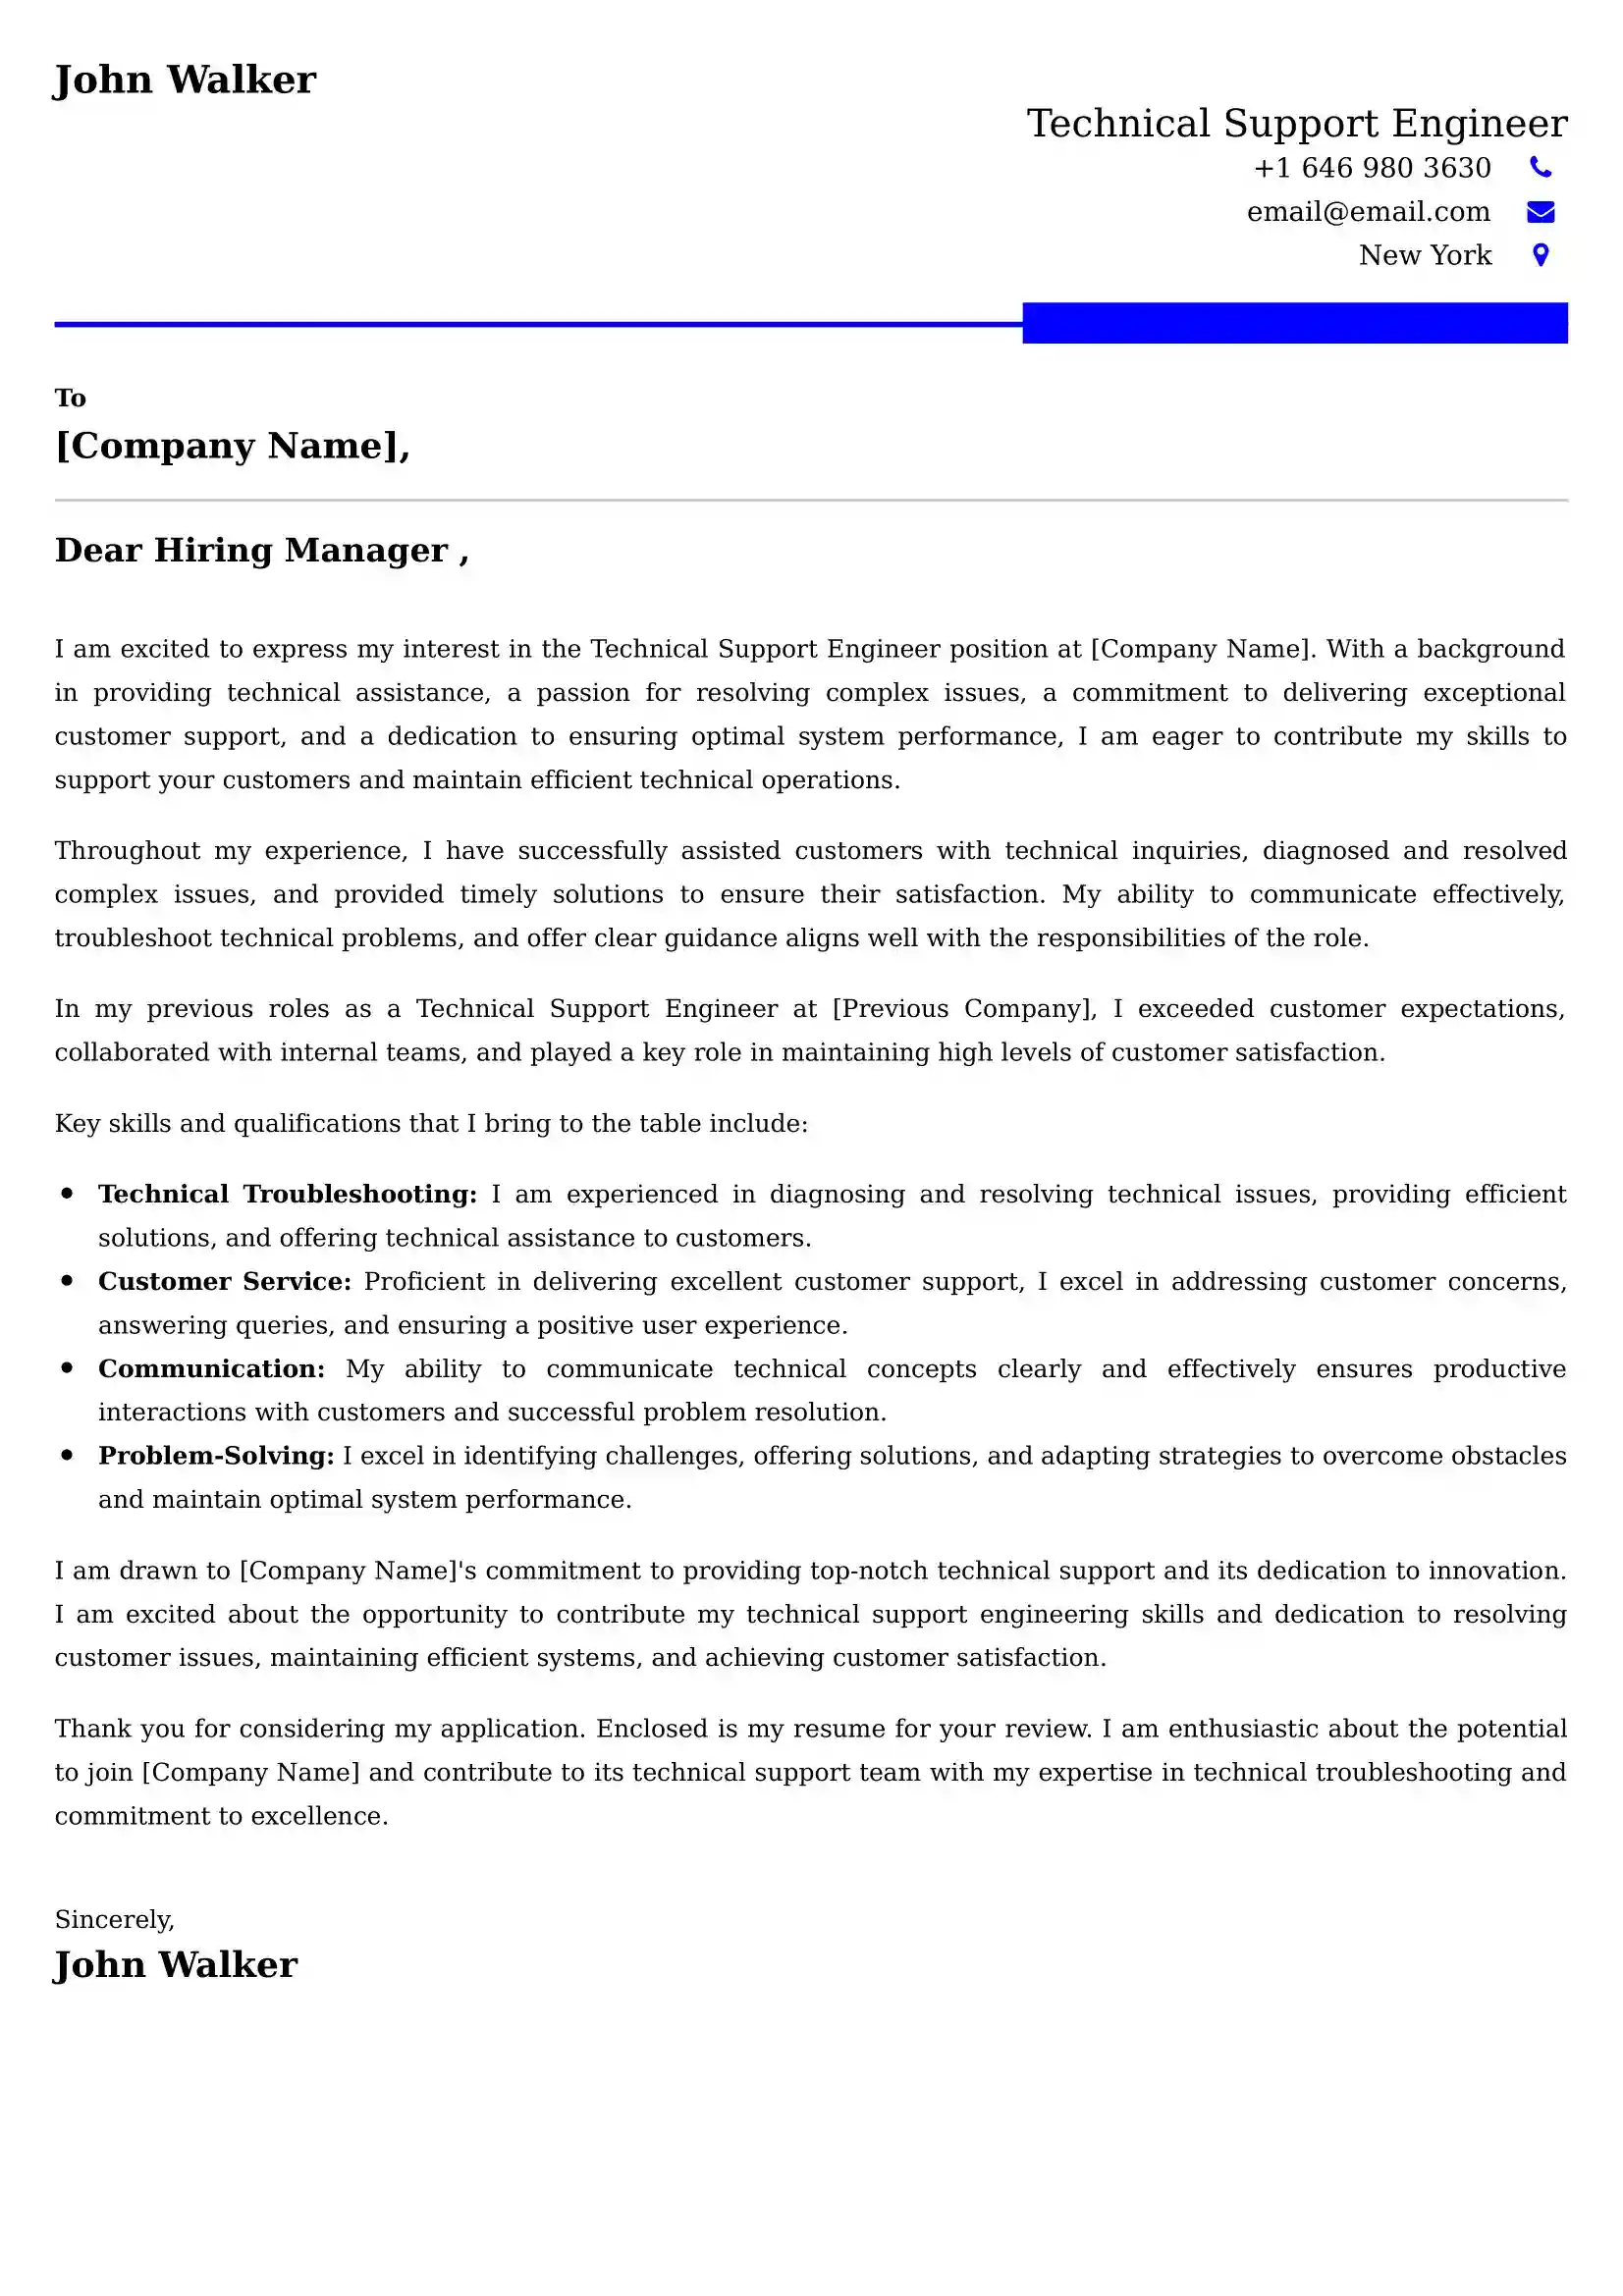 Technical Support Engineer Cover Letter Examples UAE - ATS Format